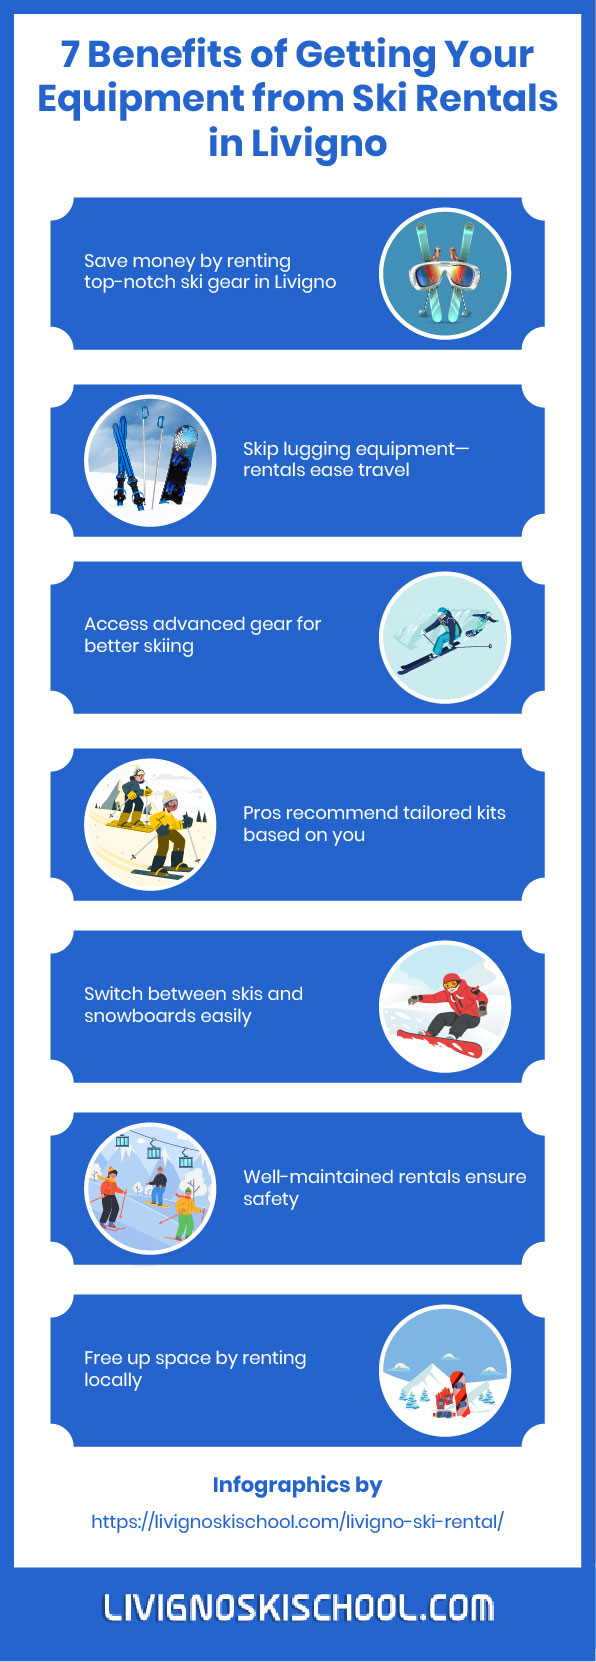 Benefits of Getting Your Equipment from Ski Rentals